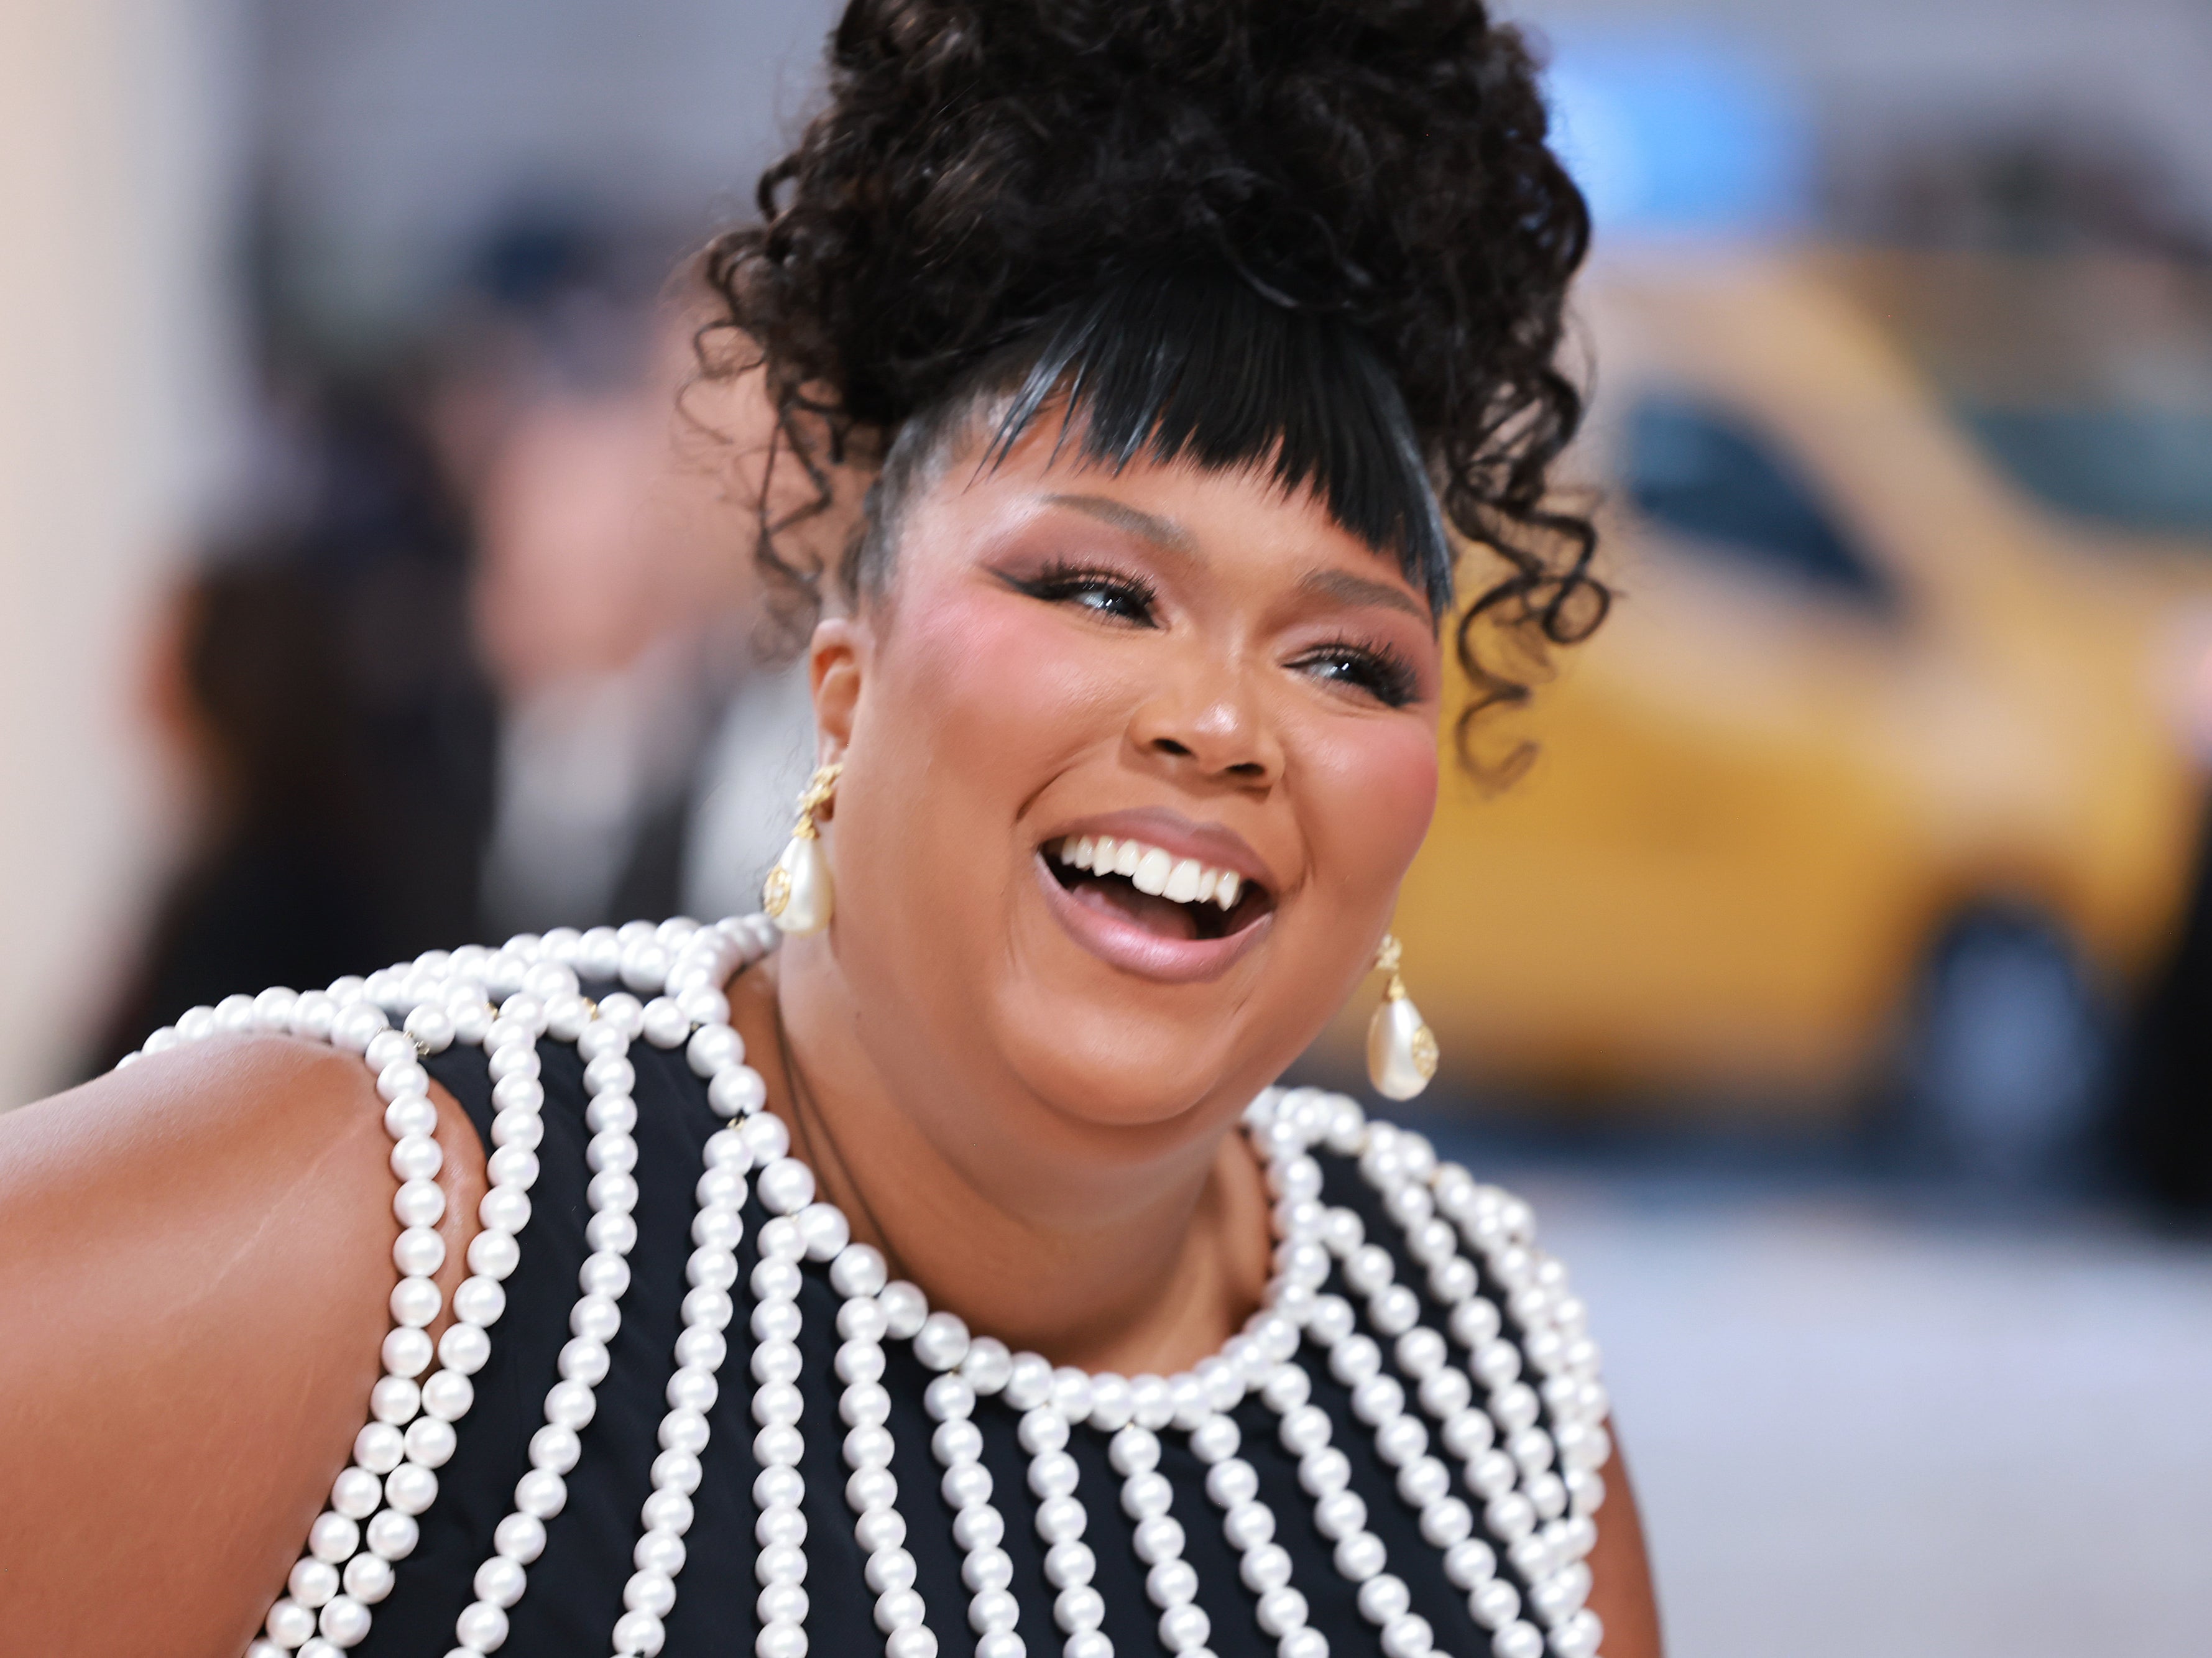 Everything Lizzo has been doing since the lawsuit against her last year